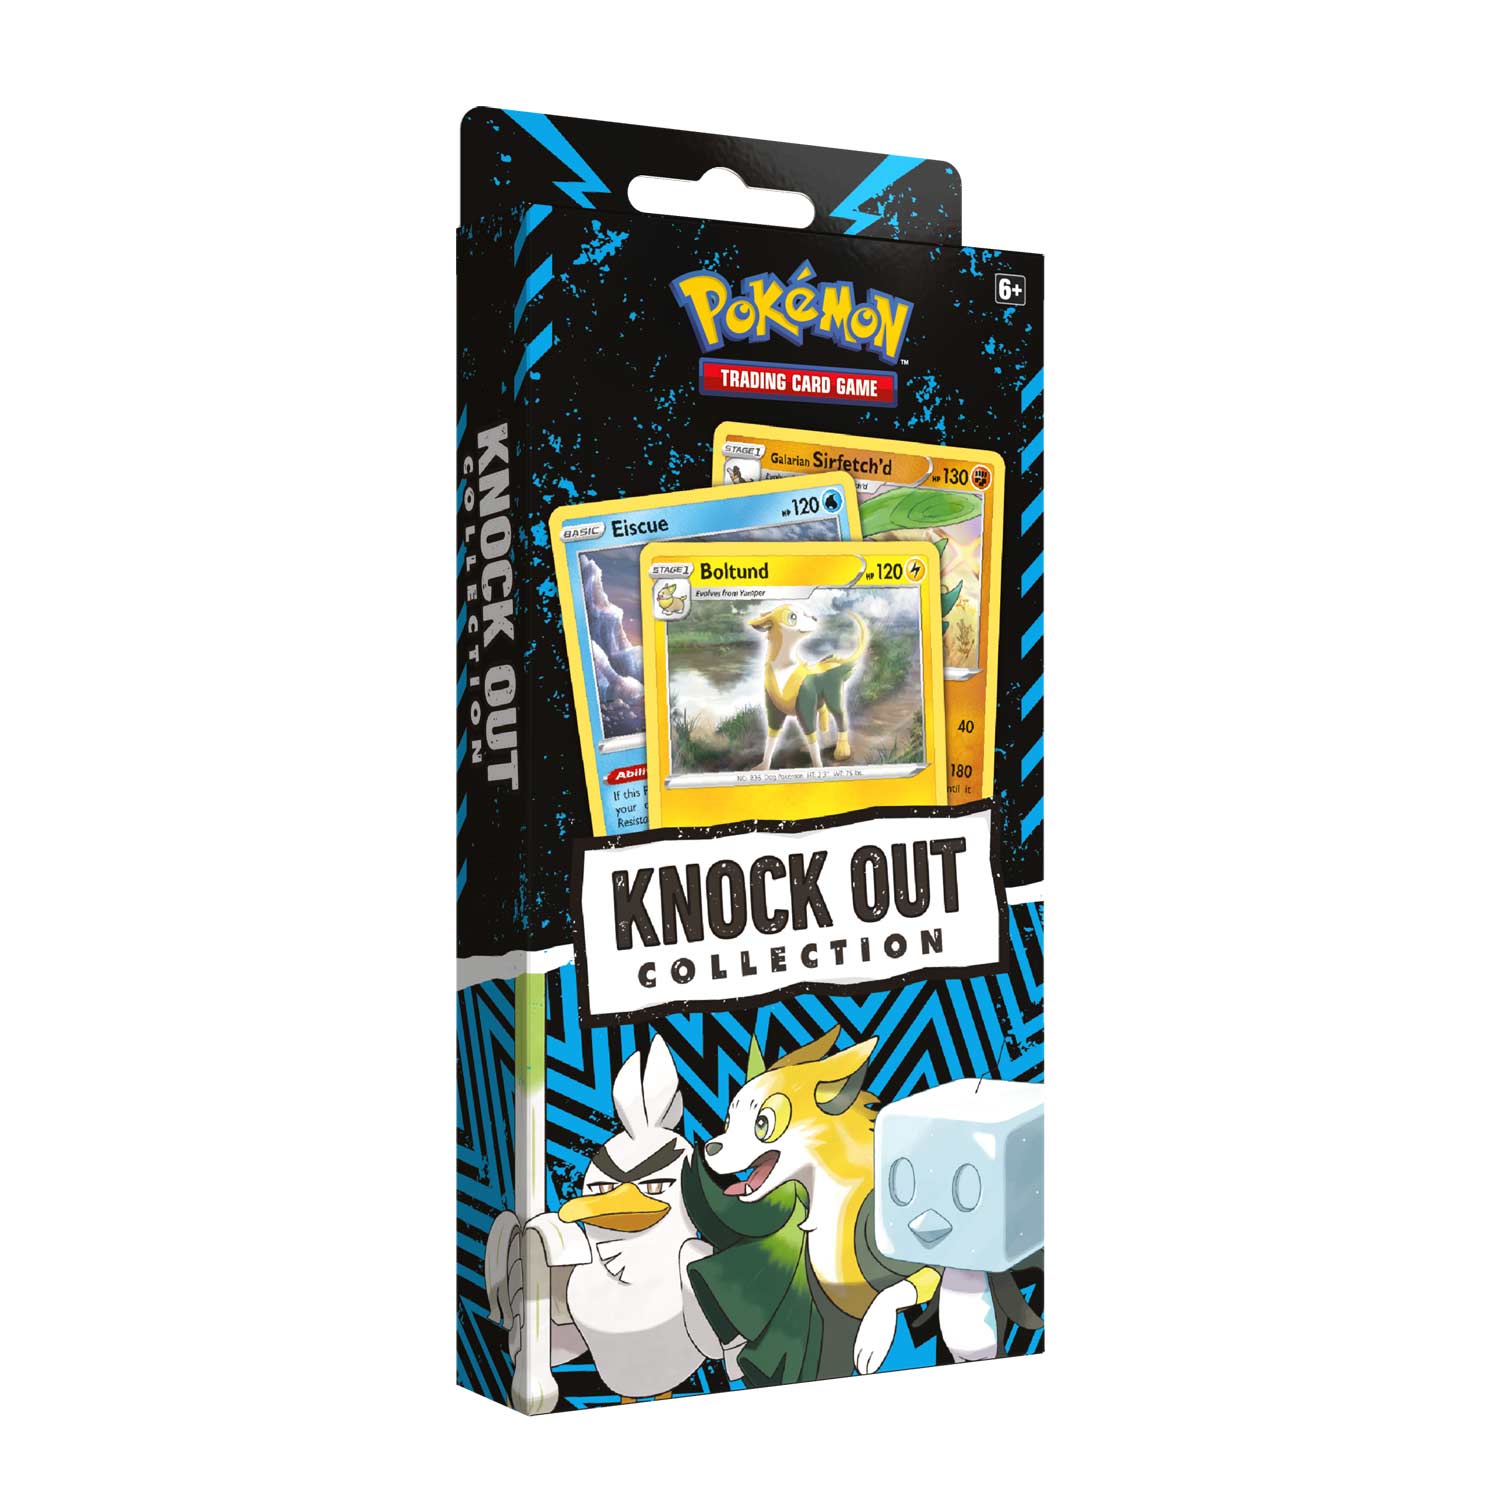 Pokemon: Knock Out Collection - Boltund, Eiscue & Galarian Sirfetch'd